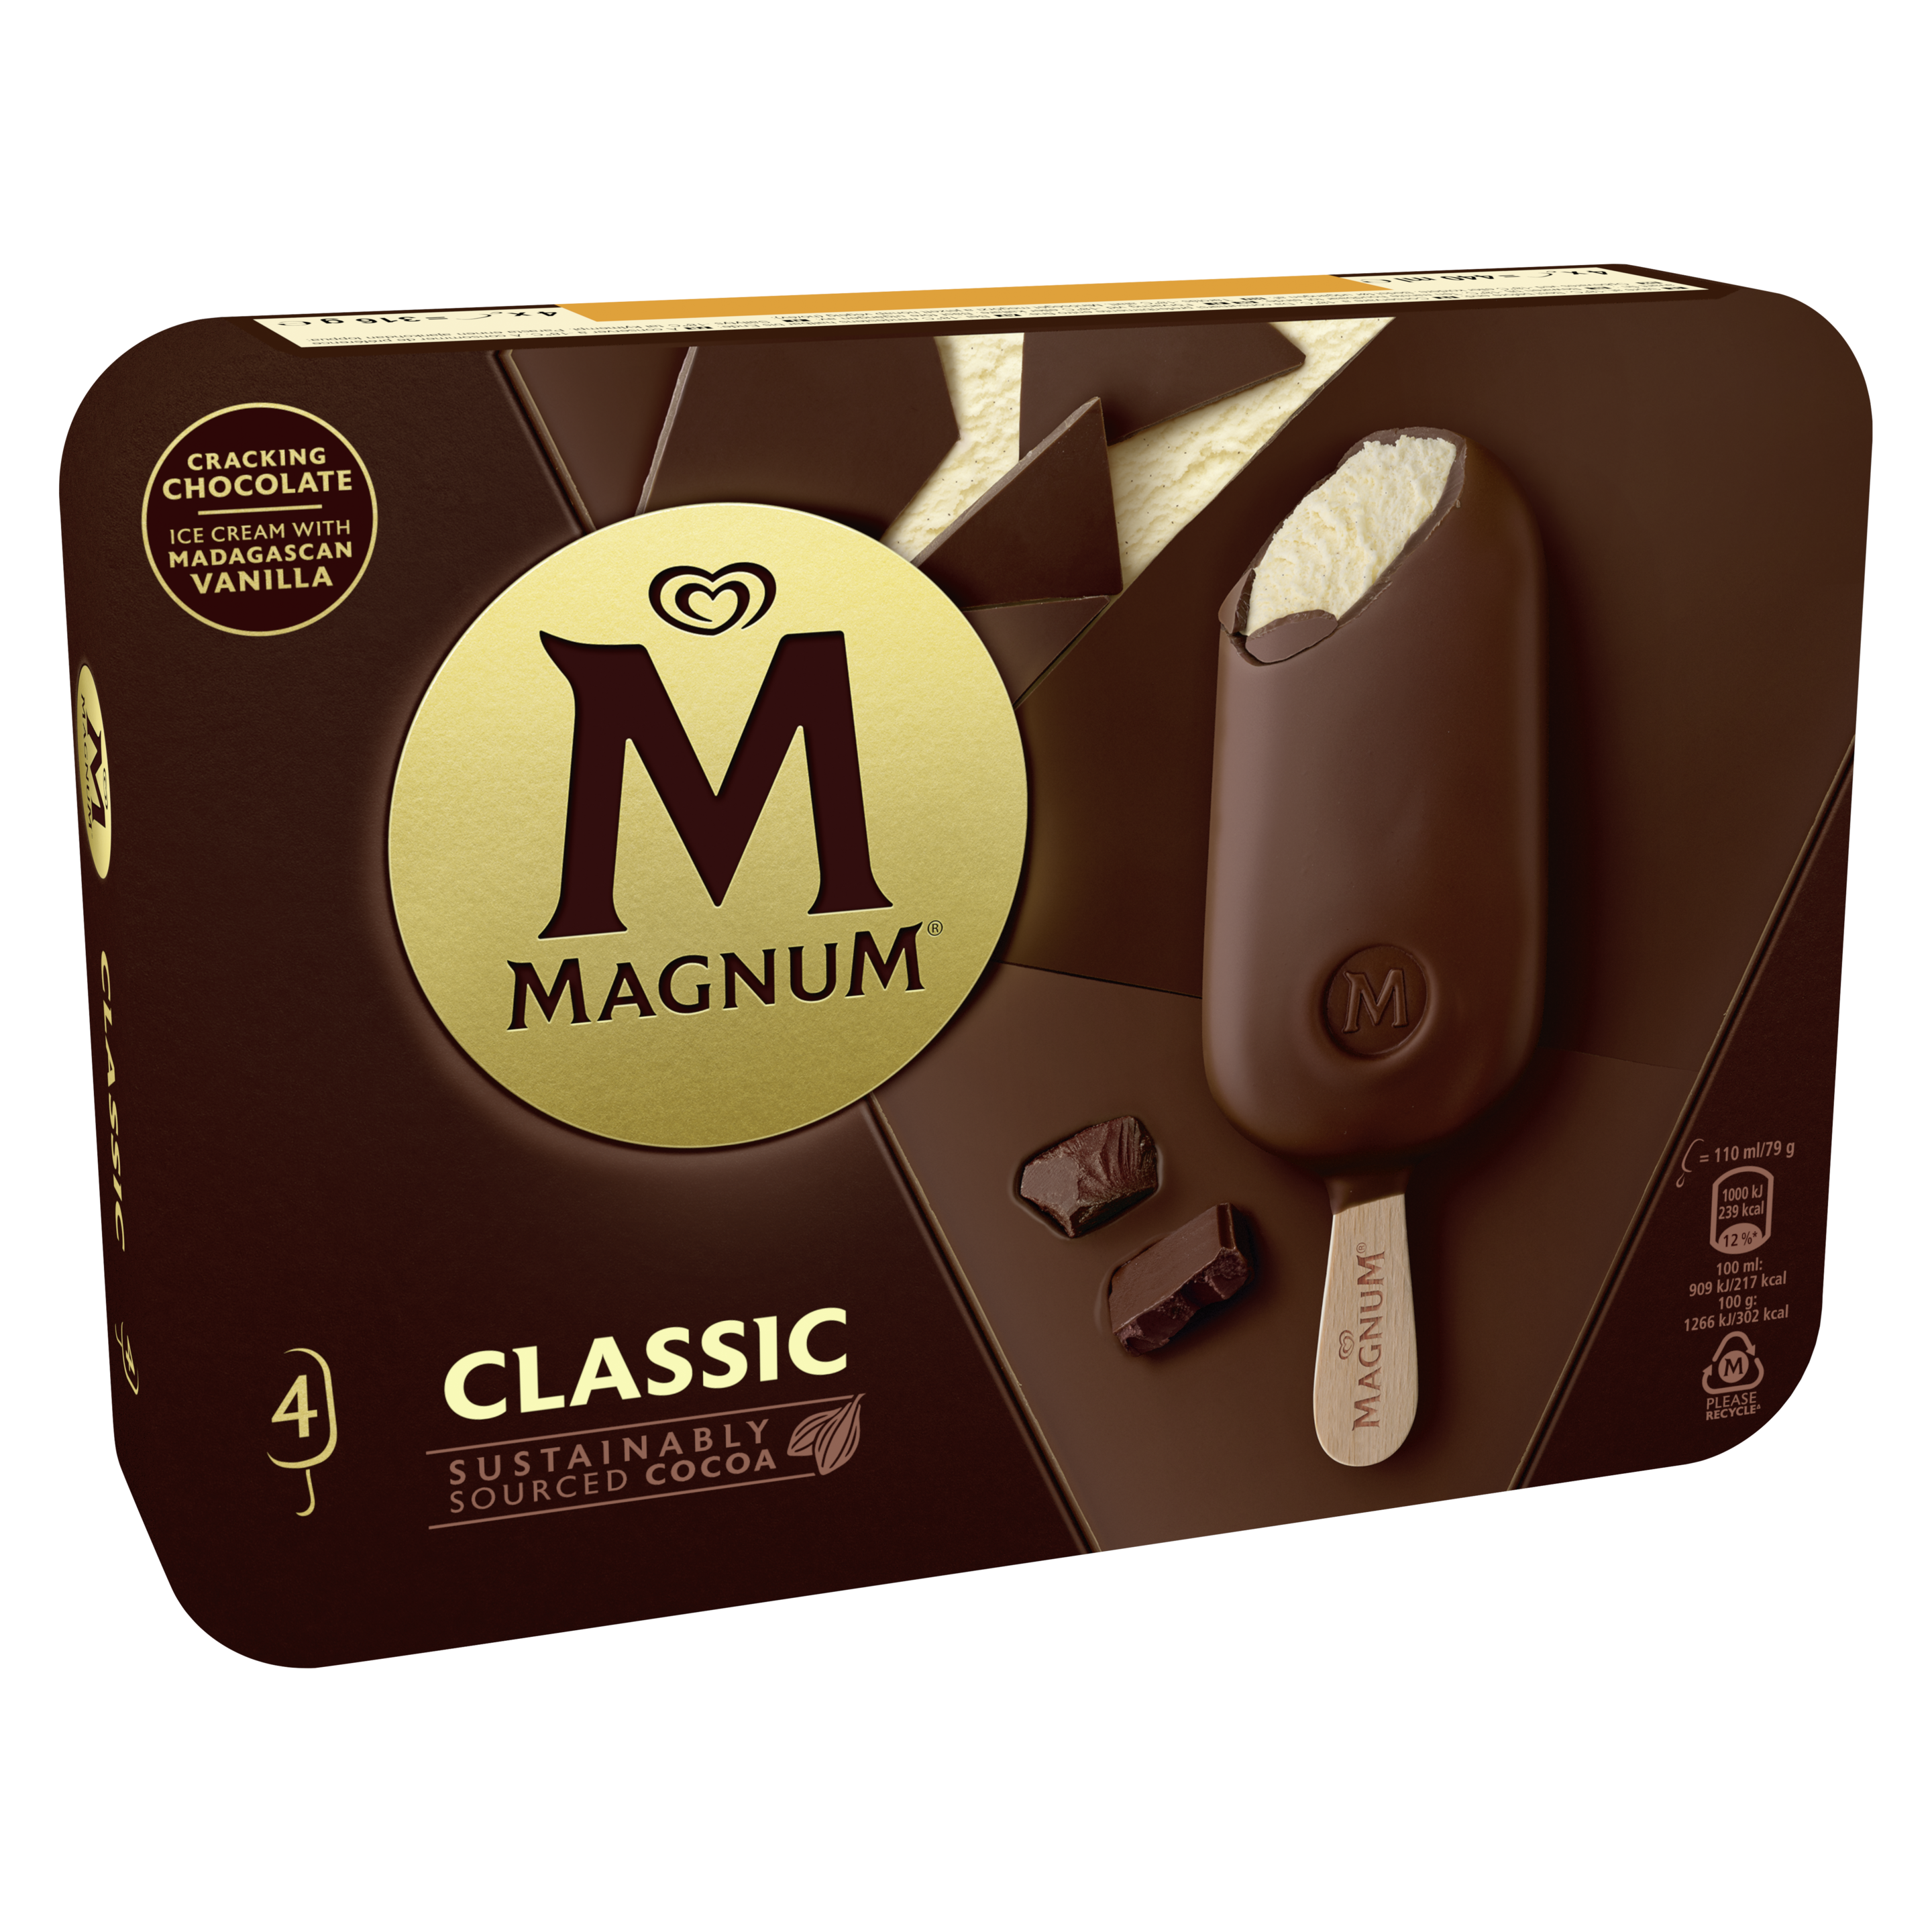 Magnum classic packaging Text